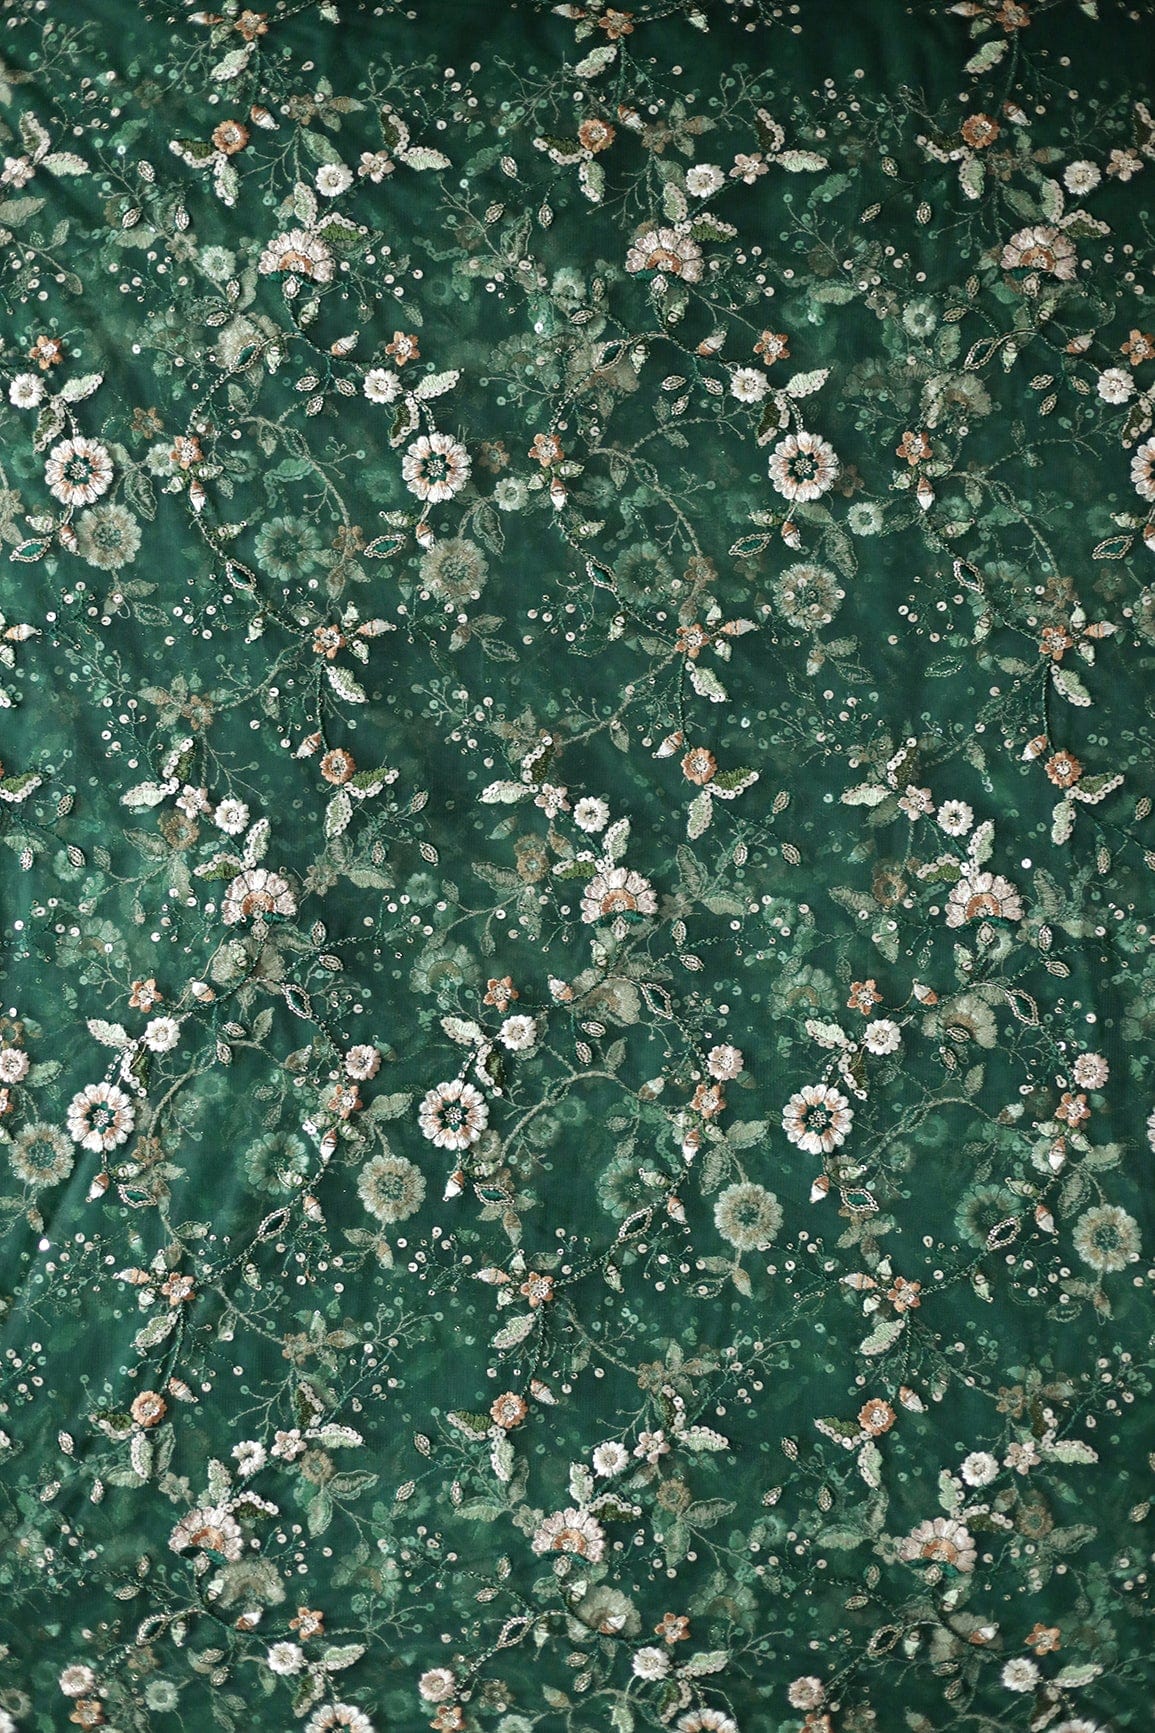 doeraa Embroidery Fabrics White And Green Thread With Gold Sequins Floral Embroidery Work On Bottle Green Soft Net Fabric